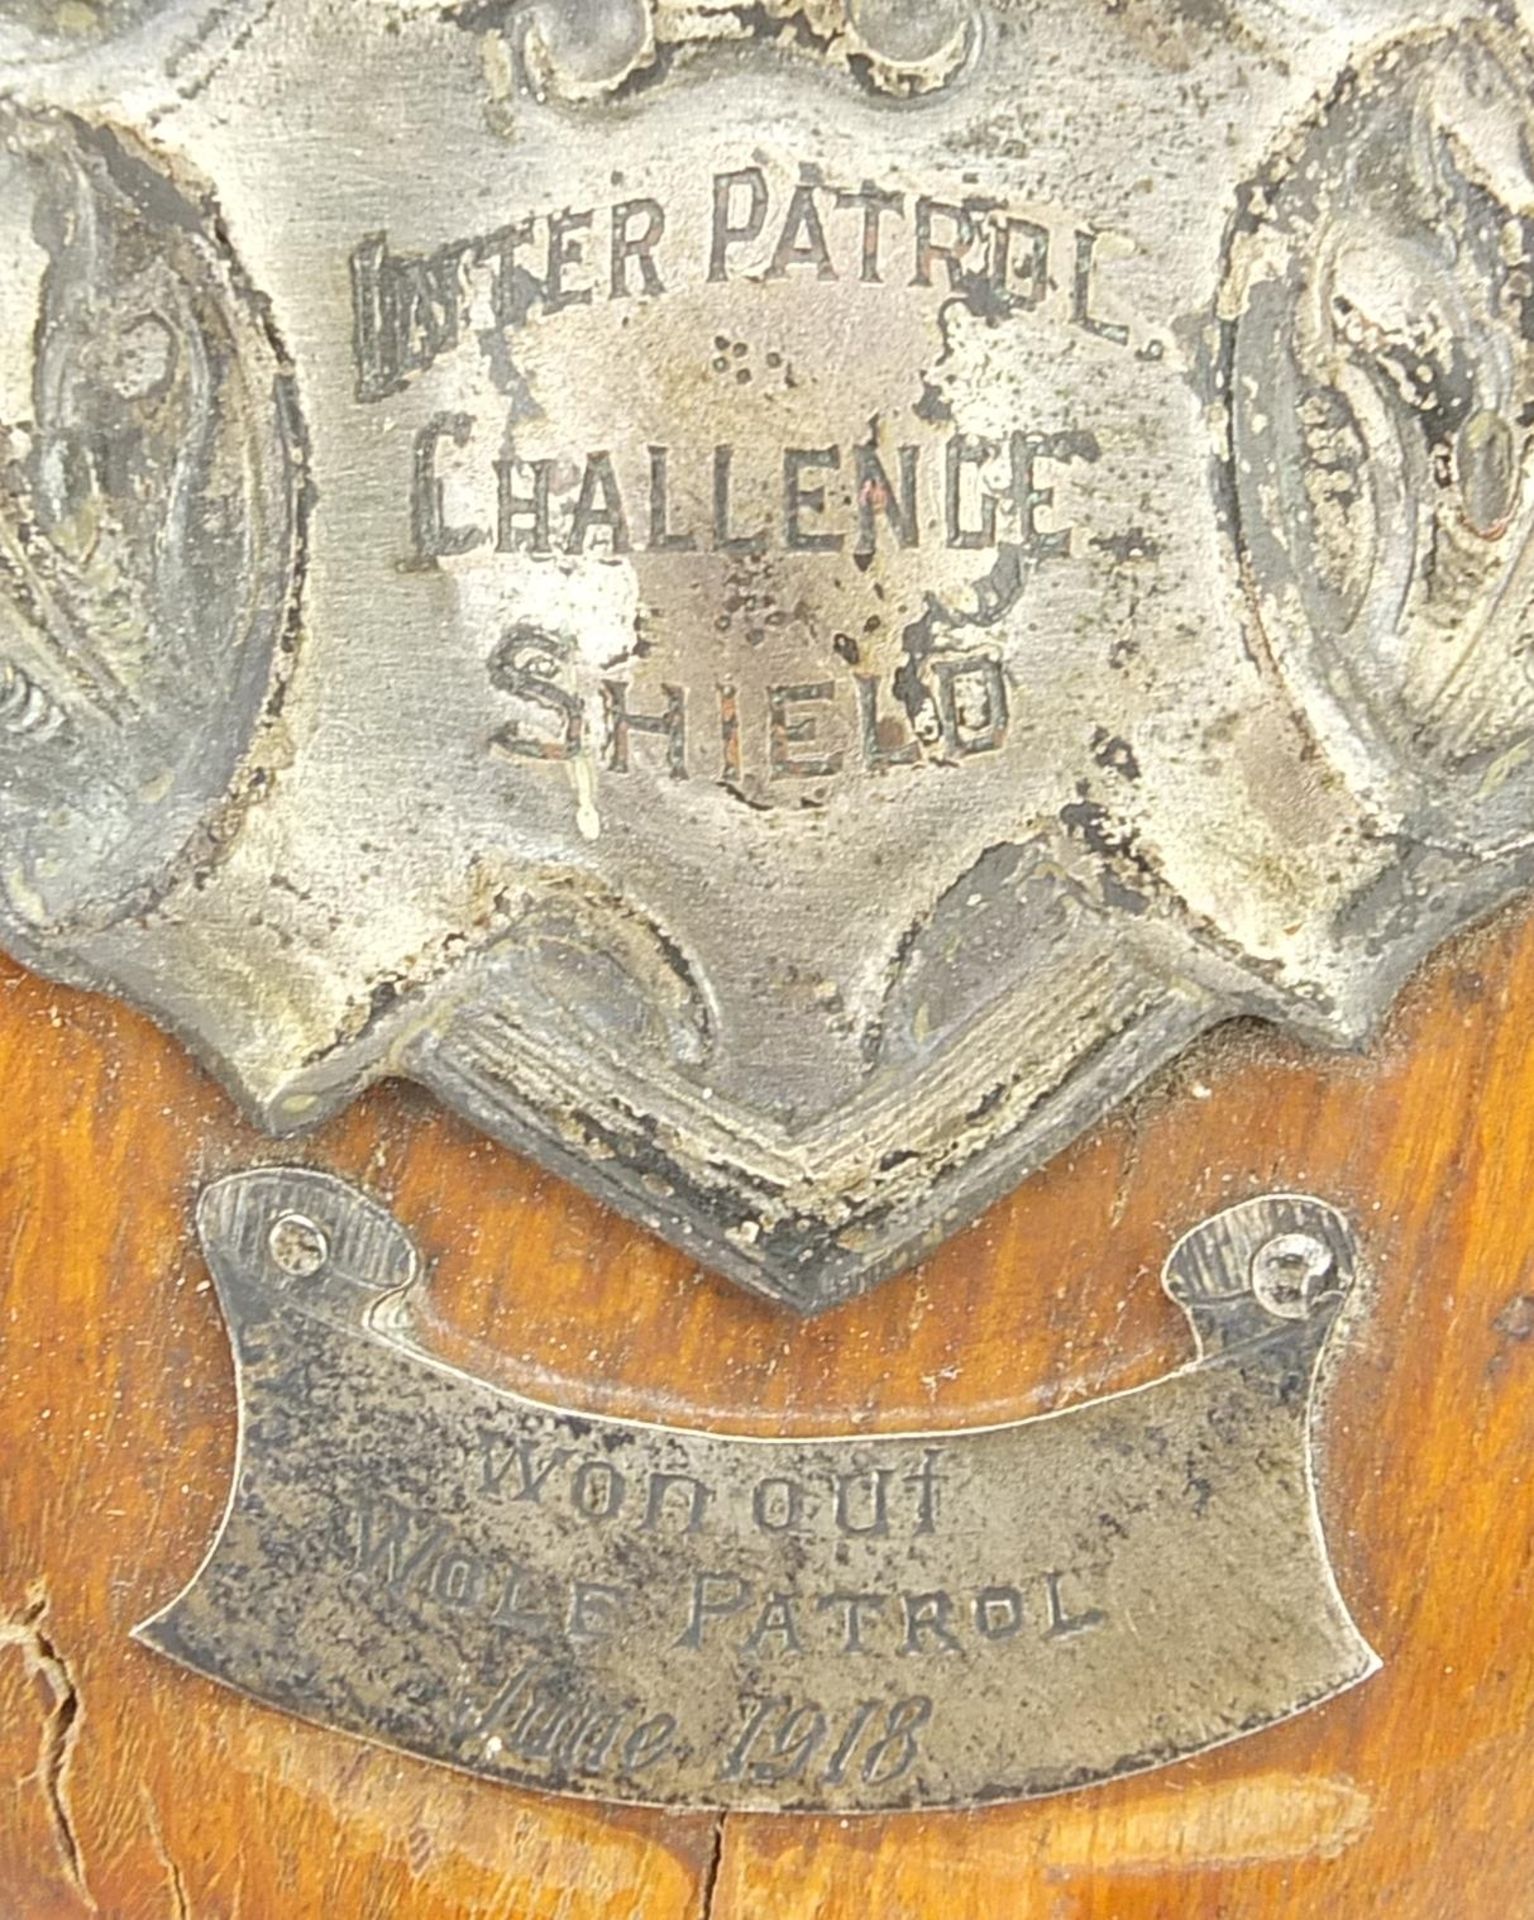 Early 20th century scouting interest Outer Patrol Challenge oak and silver plated shield impressed - Image 2 of 3